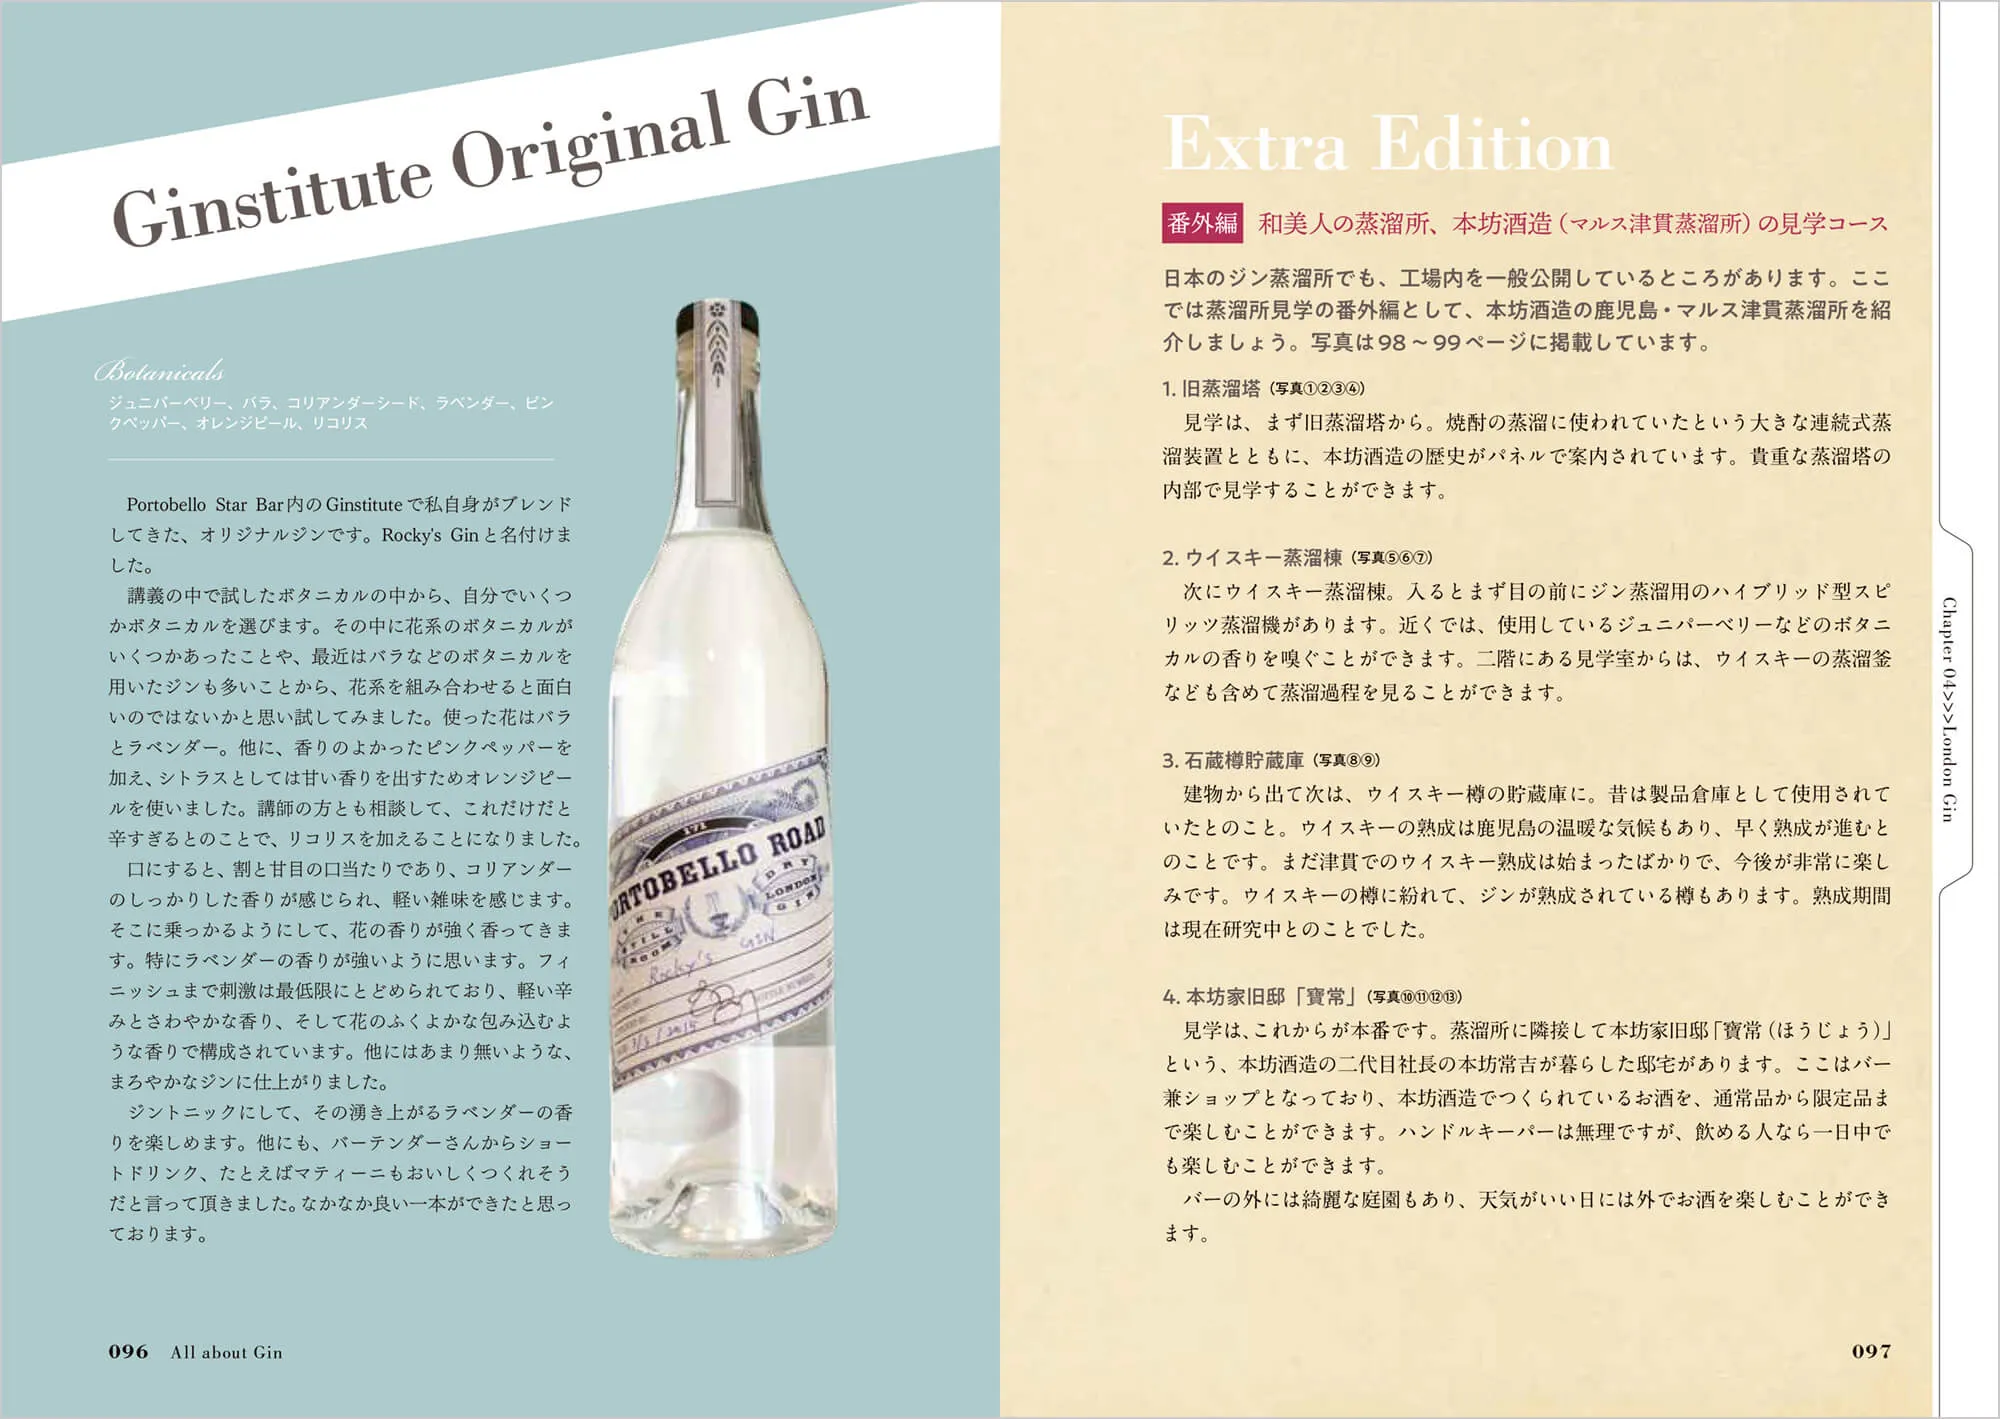 All About GIN ジンのすべて 中面